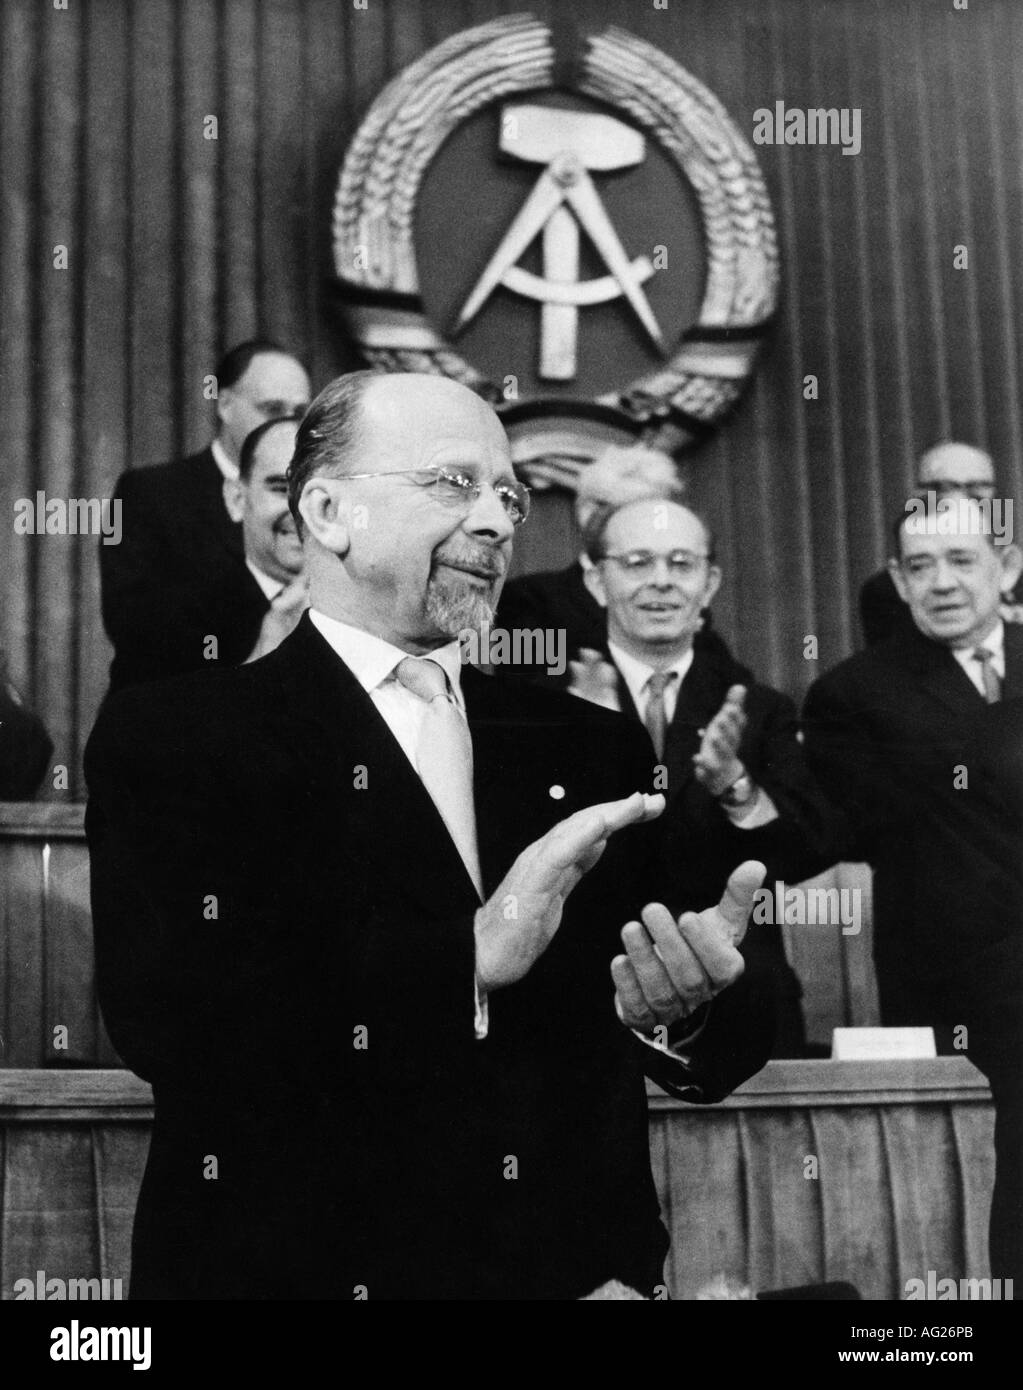 Ulbricht, Walter, 30.6.1893 - 1.8.1973, German politician (SED), half length, after reelection for chairman of council of state, applauding, 20.7.1960, Stock Photo